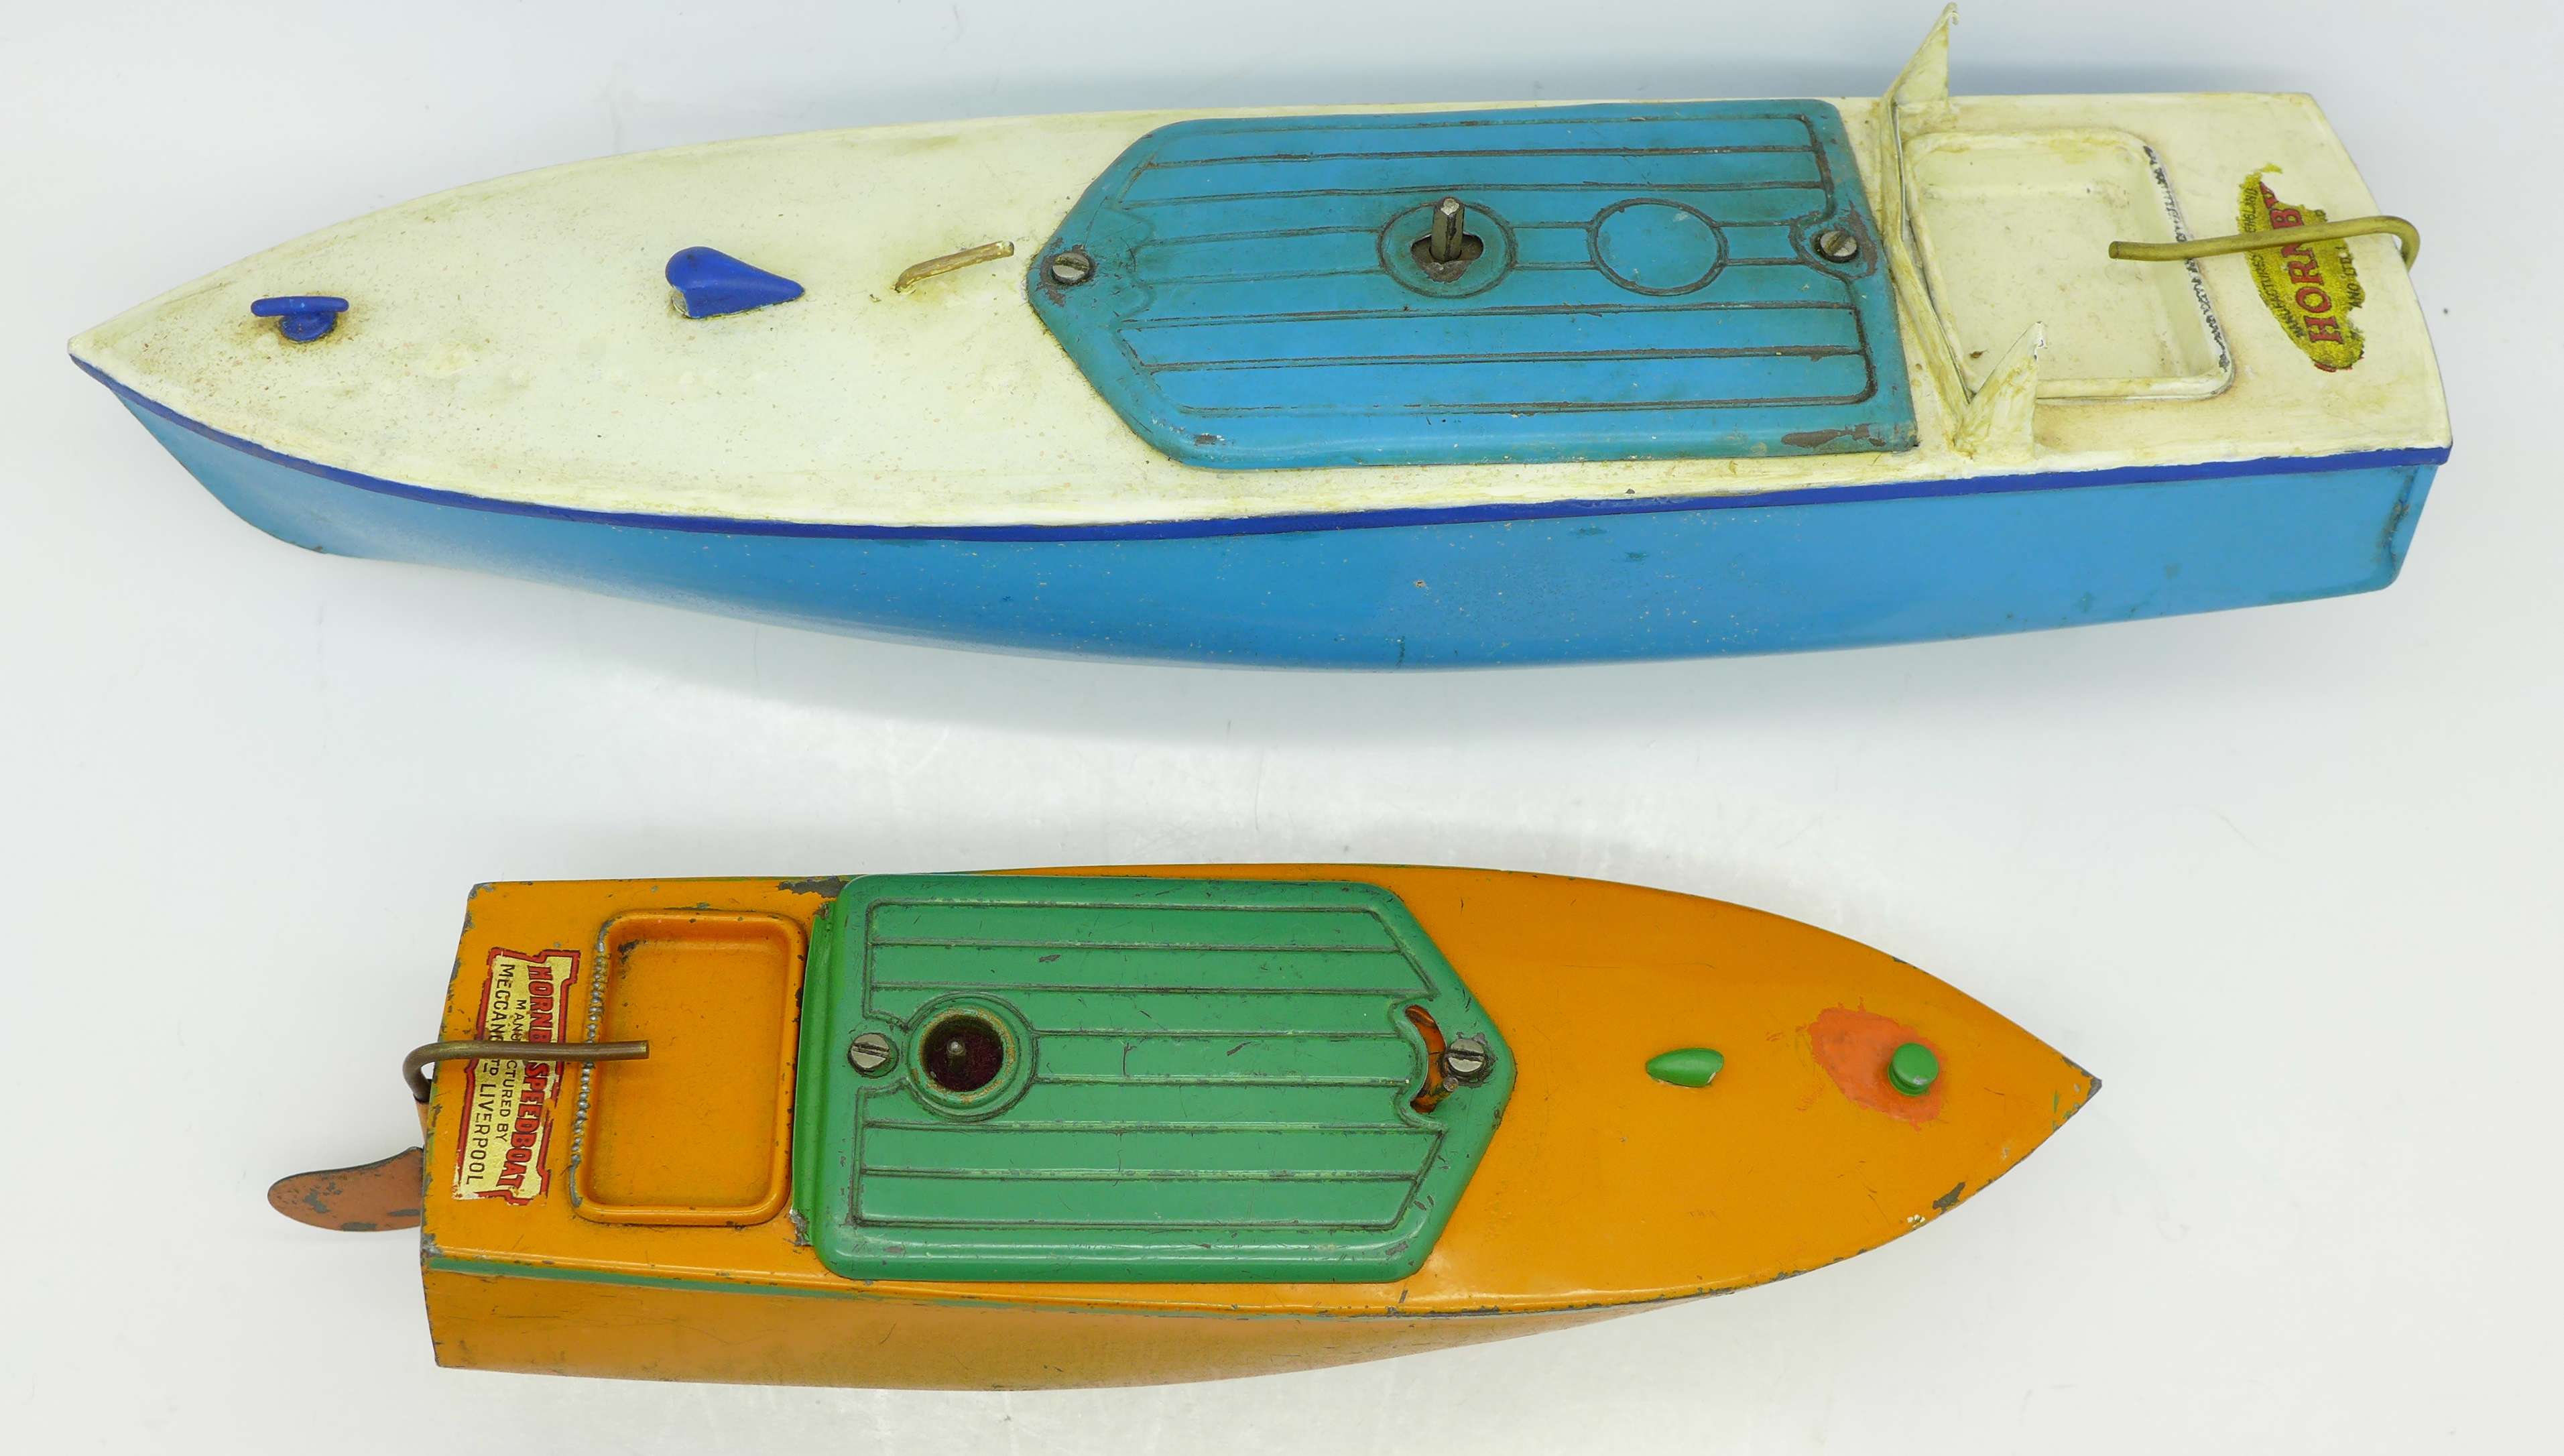 Two Hornby pre-war speedboats, - Image 3 of 3